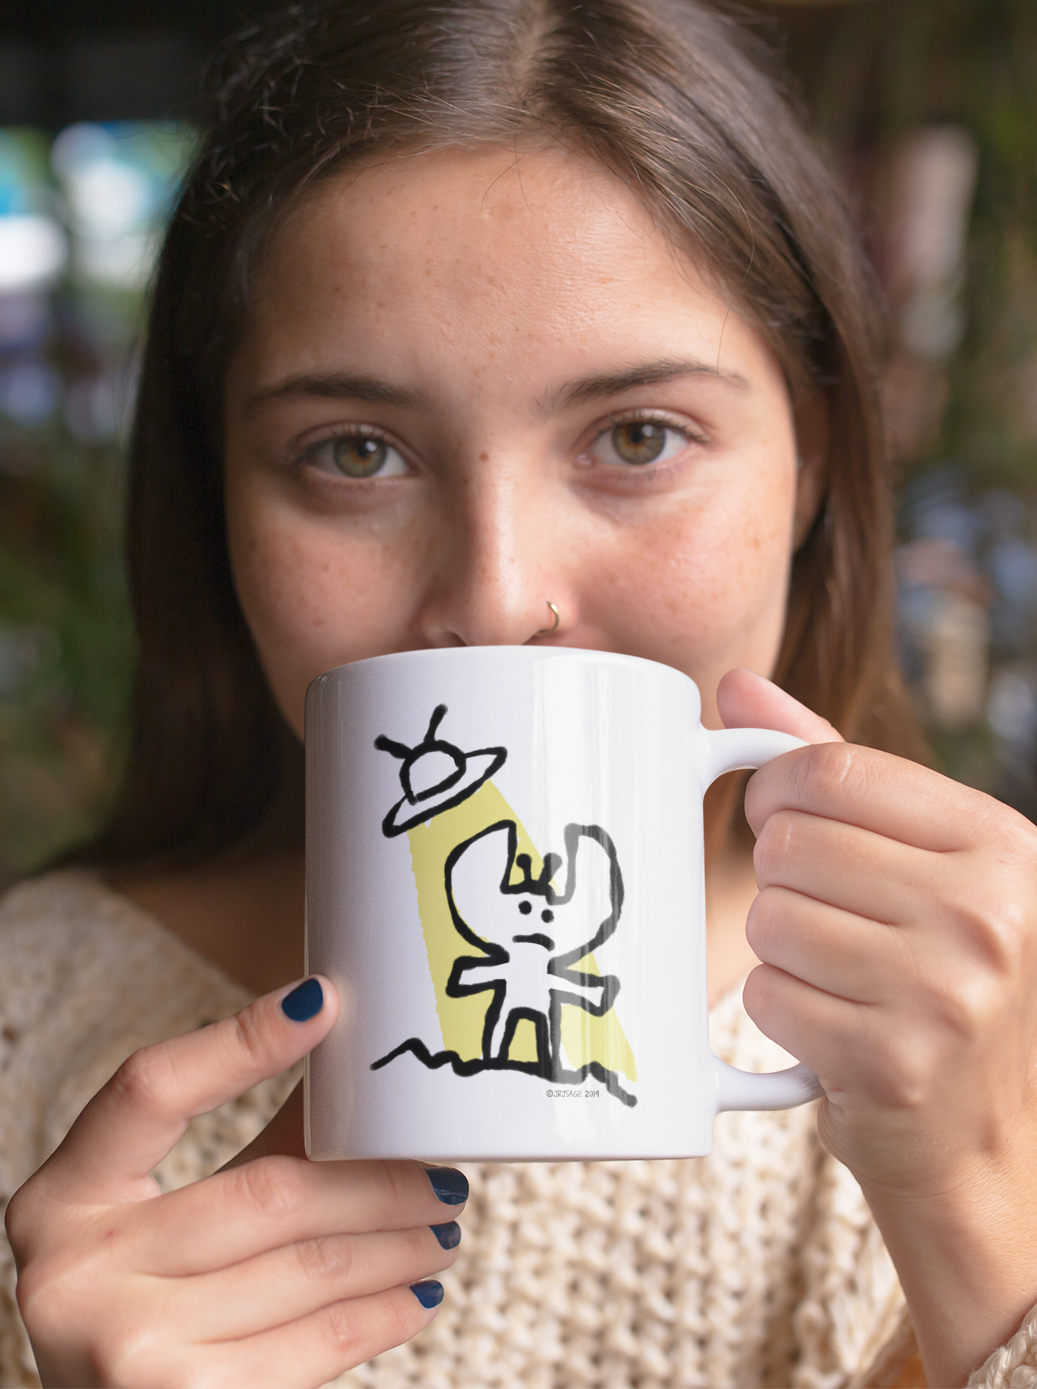 A young girl drinking from a White Ceramic Hector and Bone Mug with an illustration of an Alien and his Spaceship